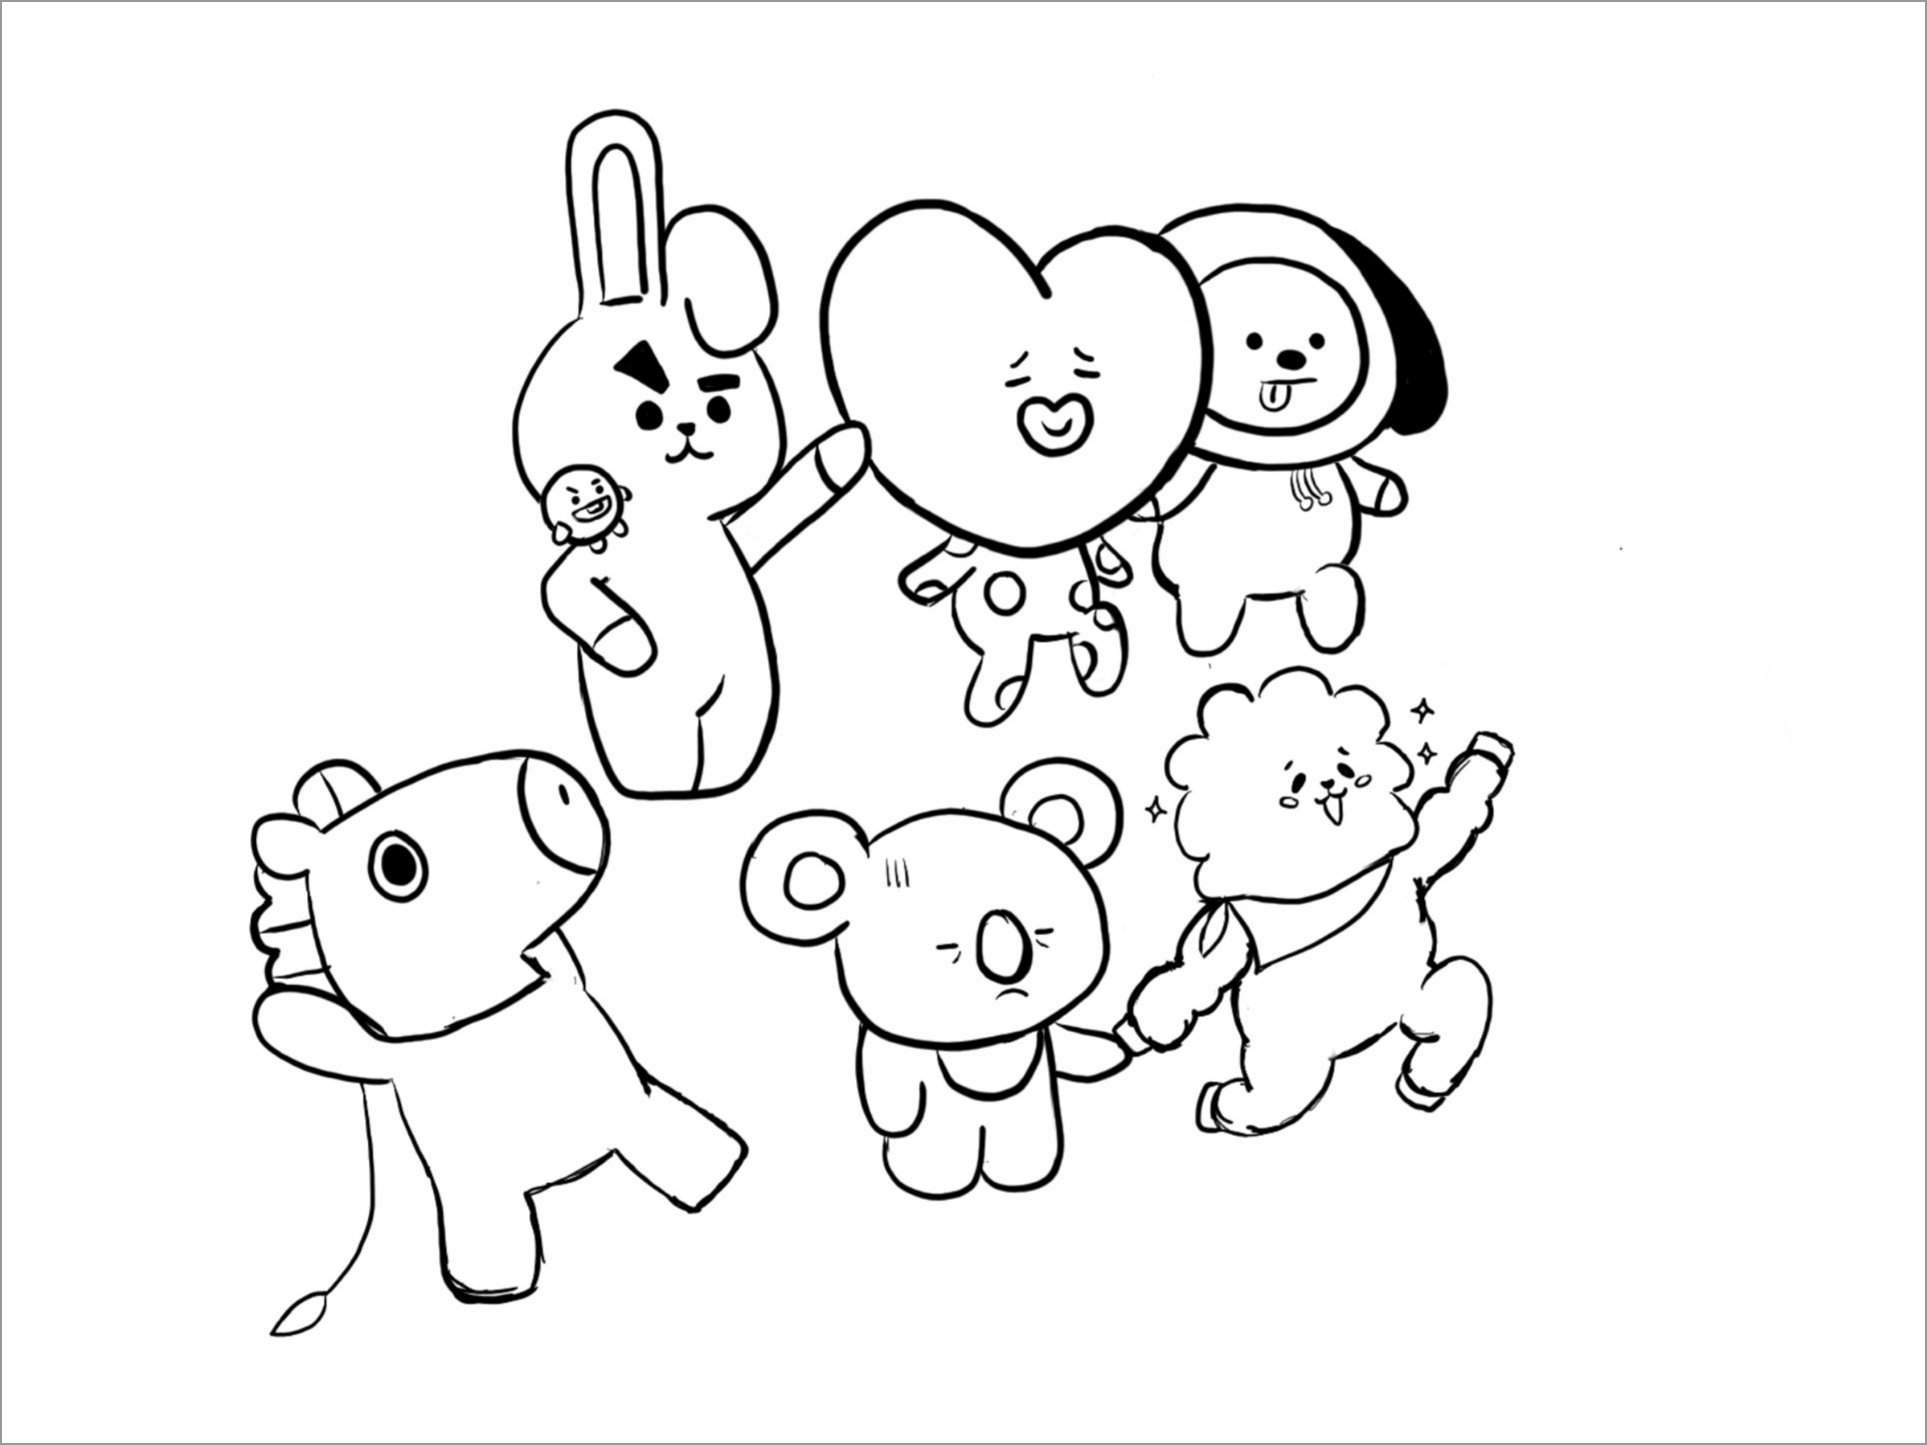 Download BT21 Coloring Pages - ColoringBay